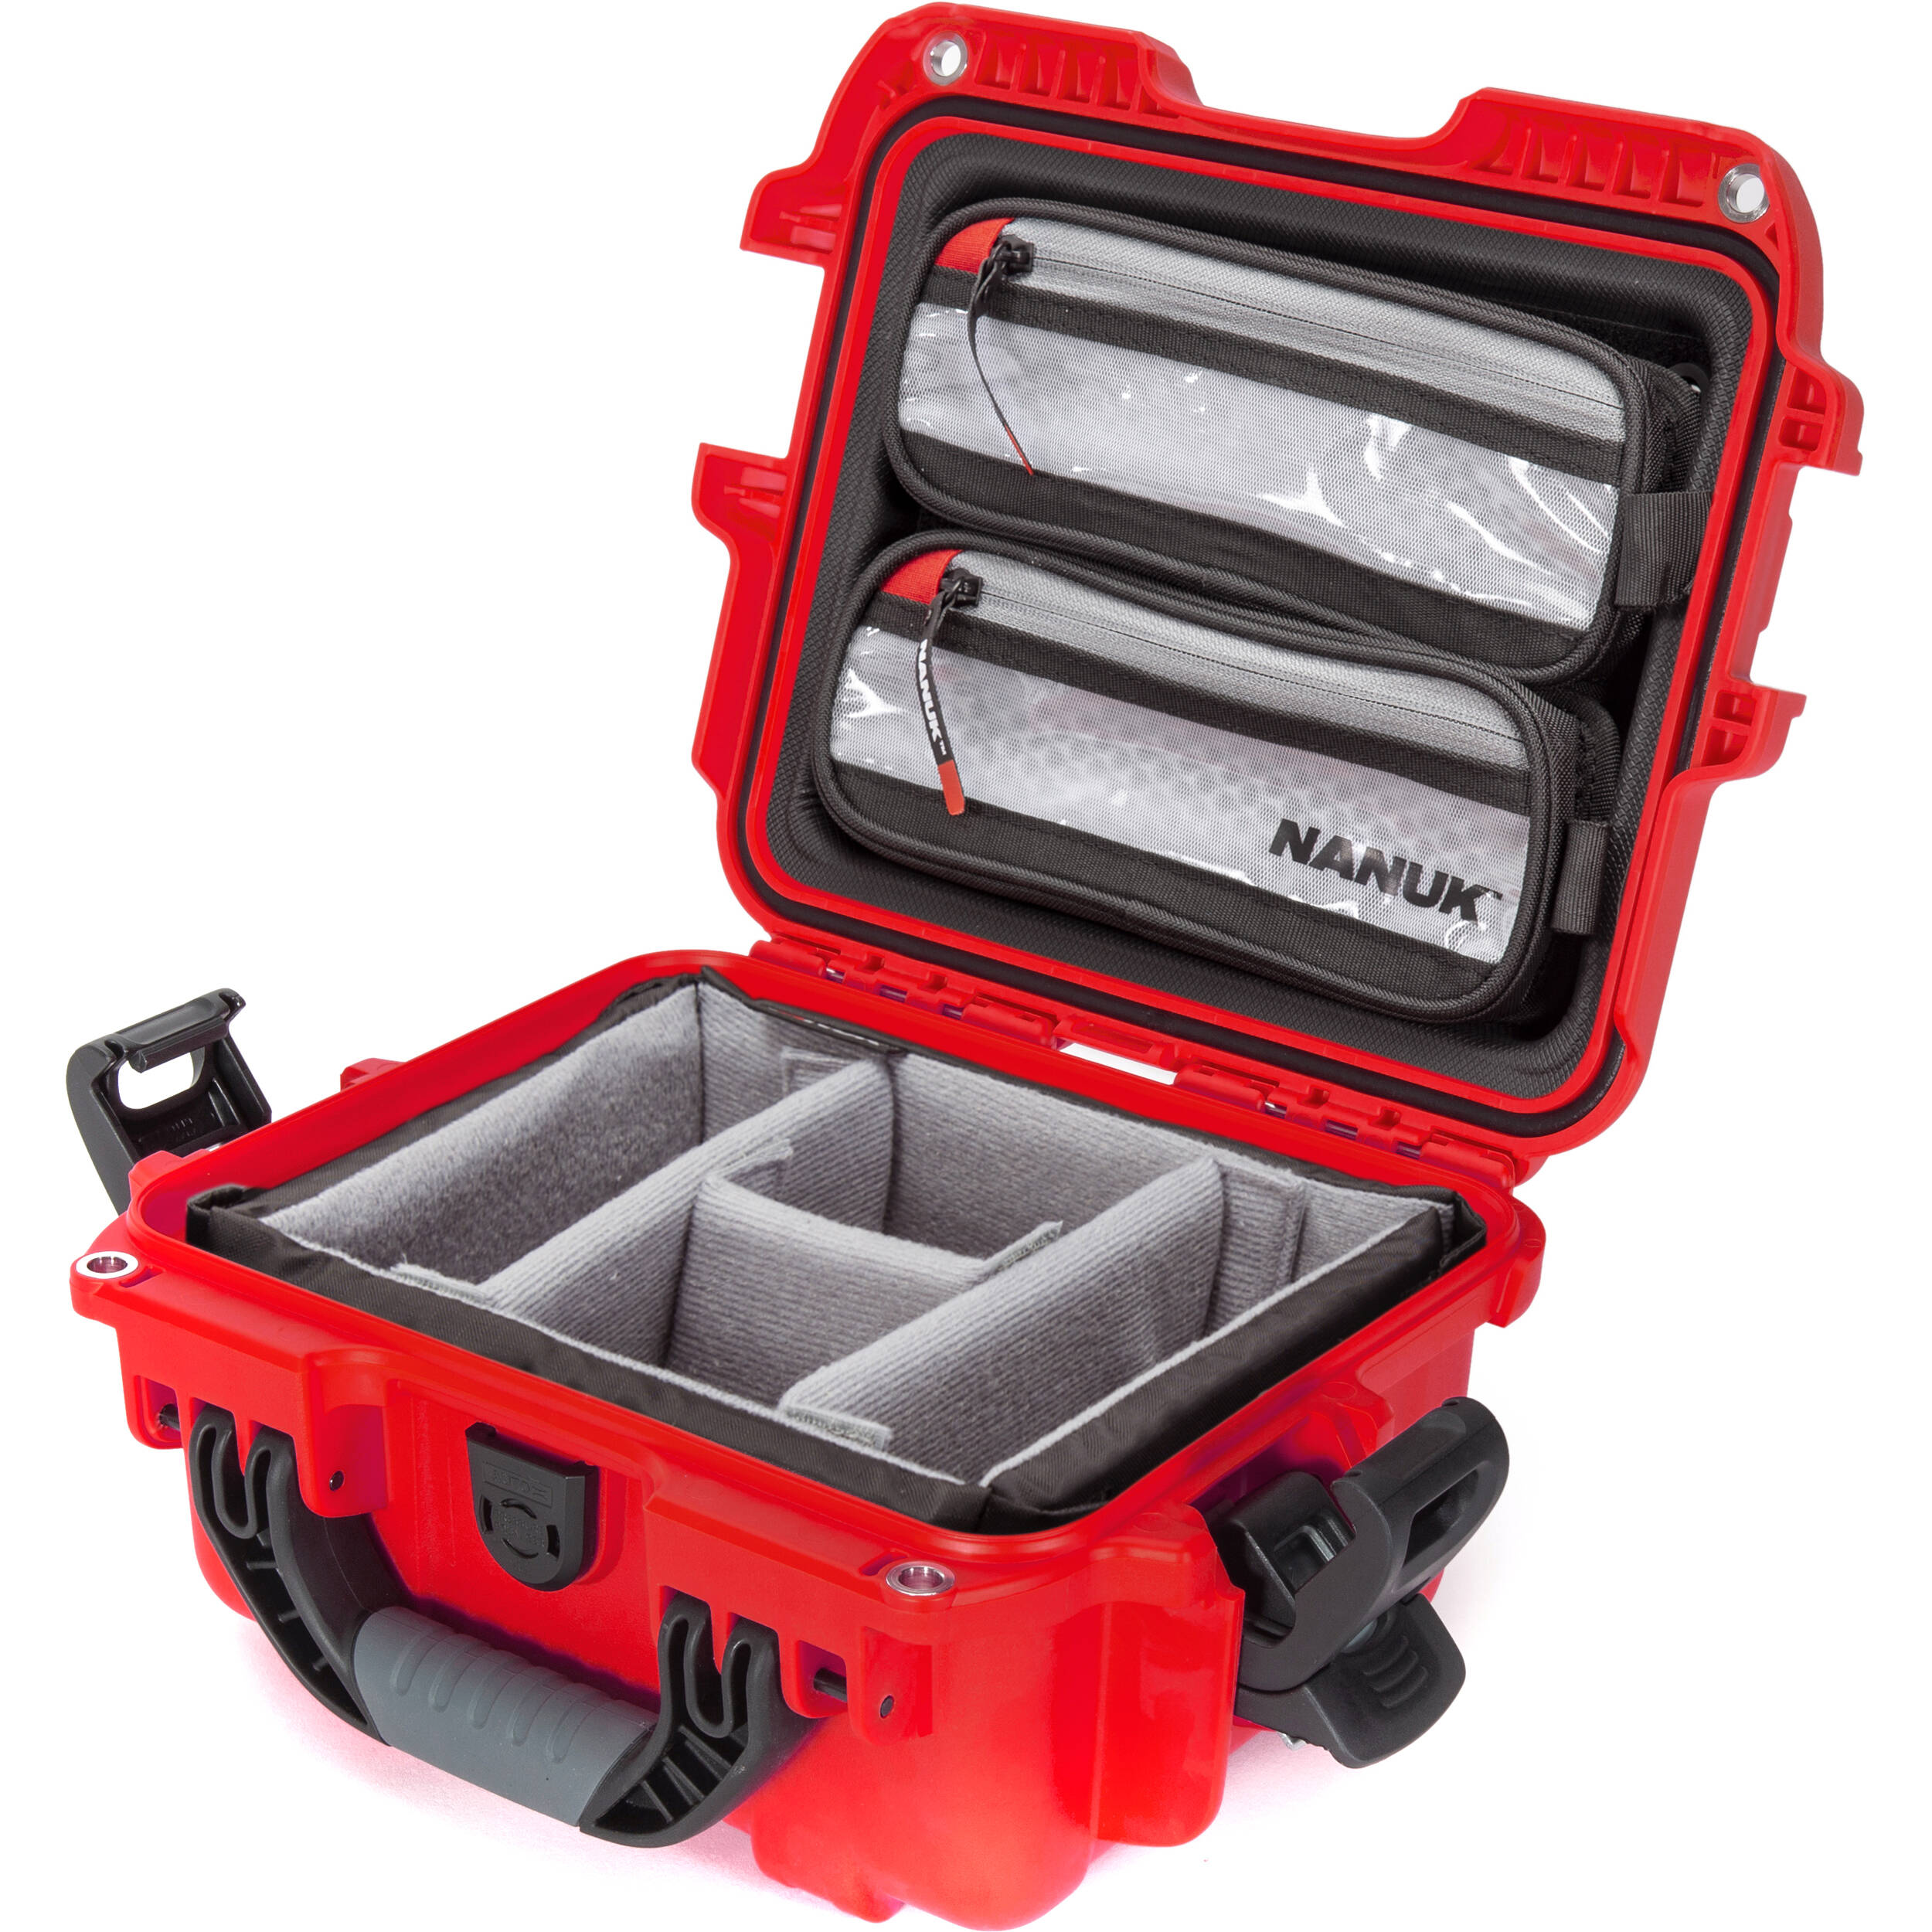 Nanuk 905 Waterproof Hard Case Pro Photo/Video Kit with Padded Dividers and Lid Organizer (Red)